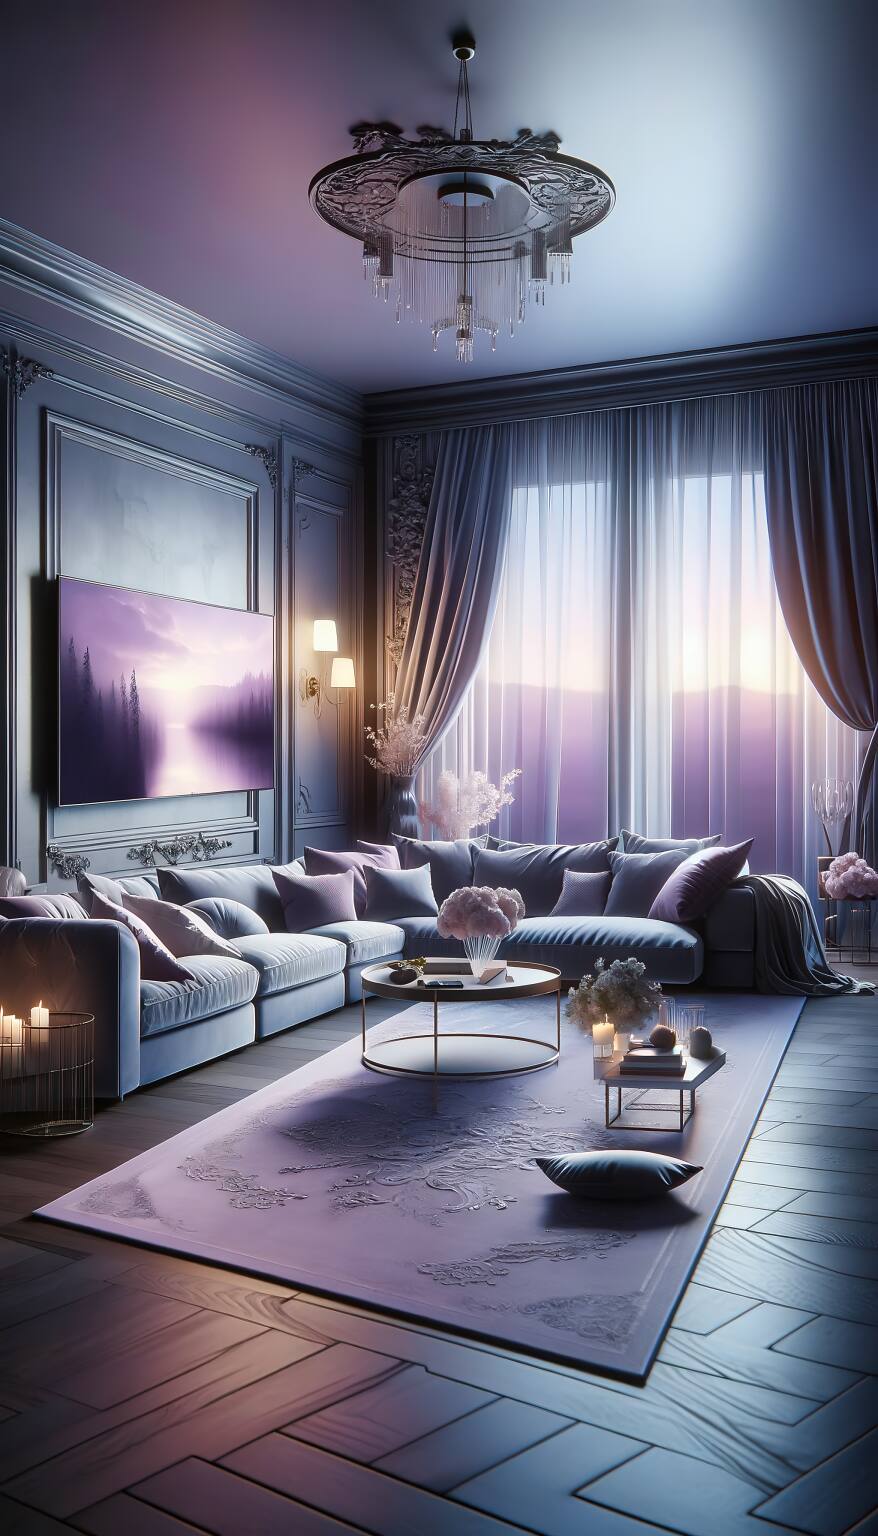 A Romantic Living Room In Soft Purple And Gray, Featuring A Cozy Sectional And A Sleek Flat-Screen Tv, Set In A Tranquil, Dreamy Twilight Atmosphere.